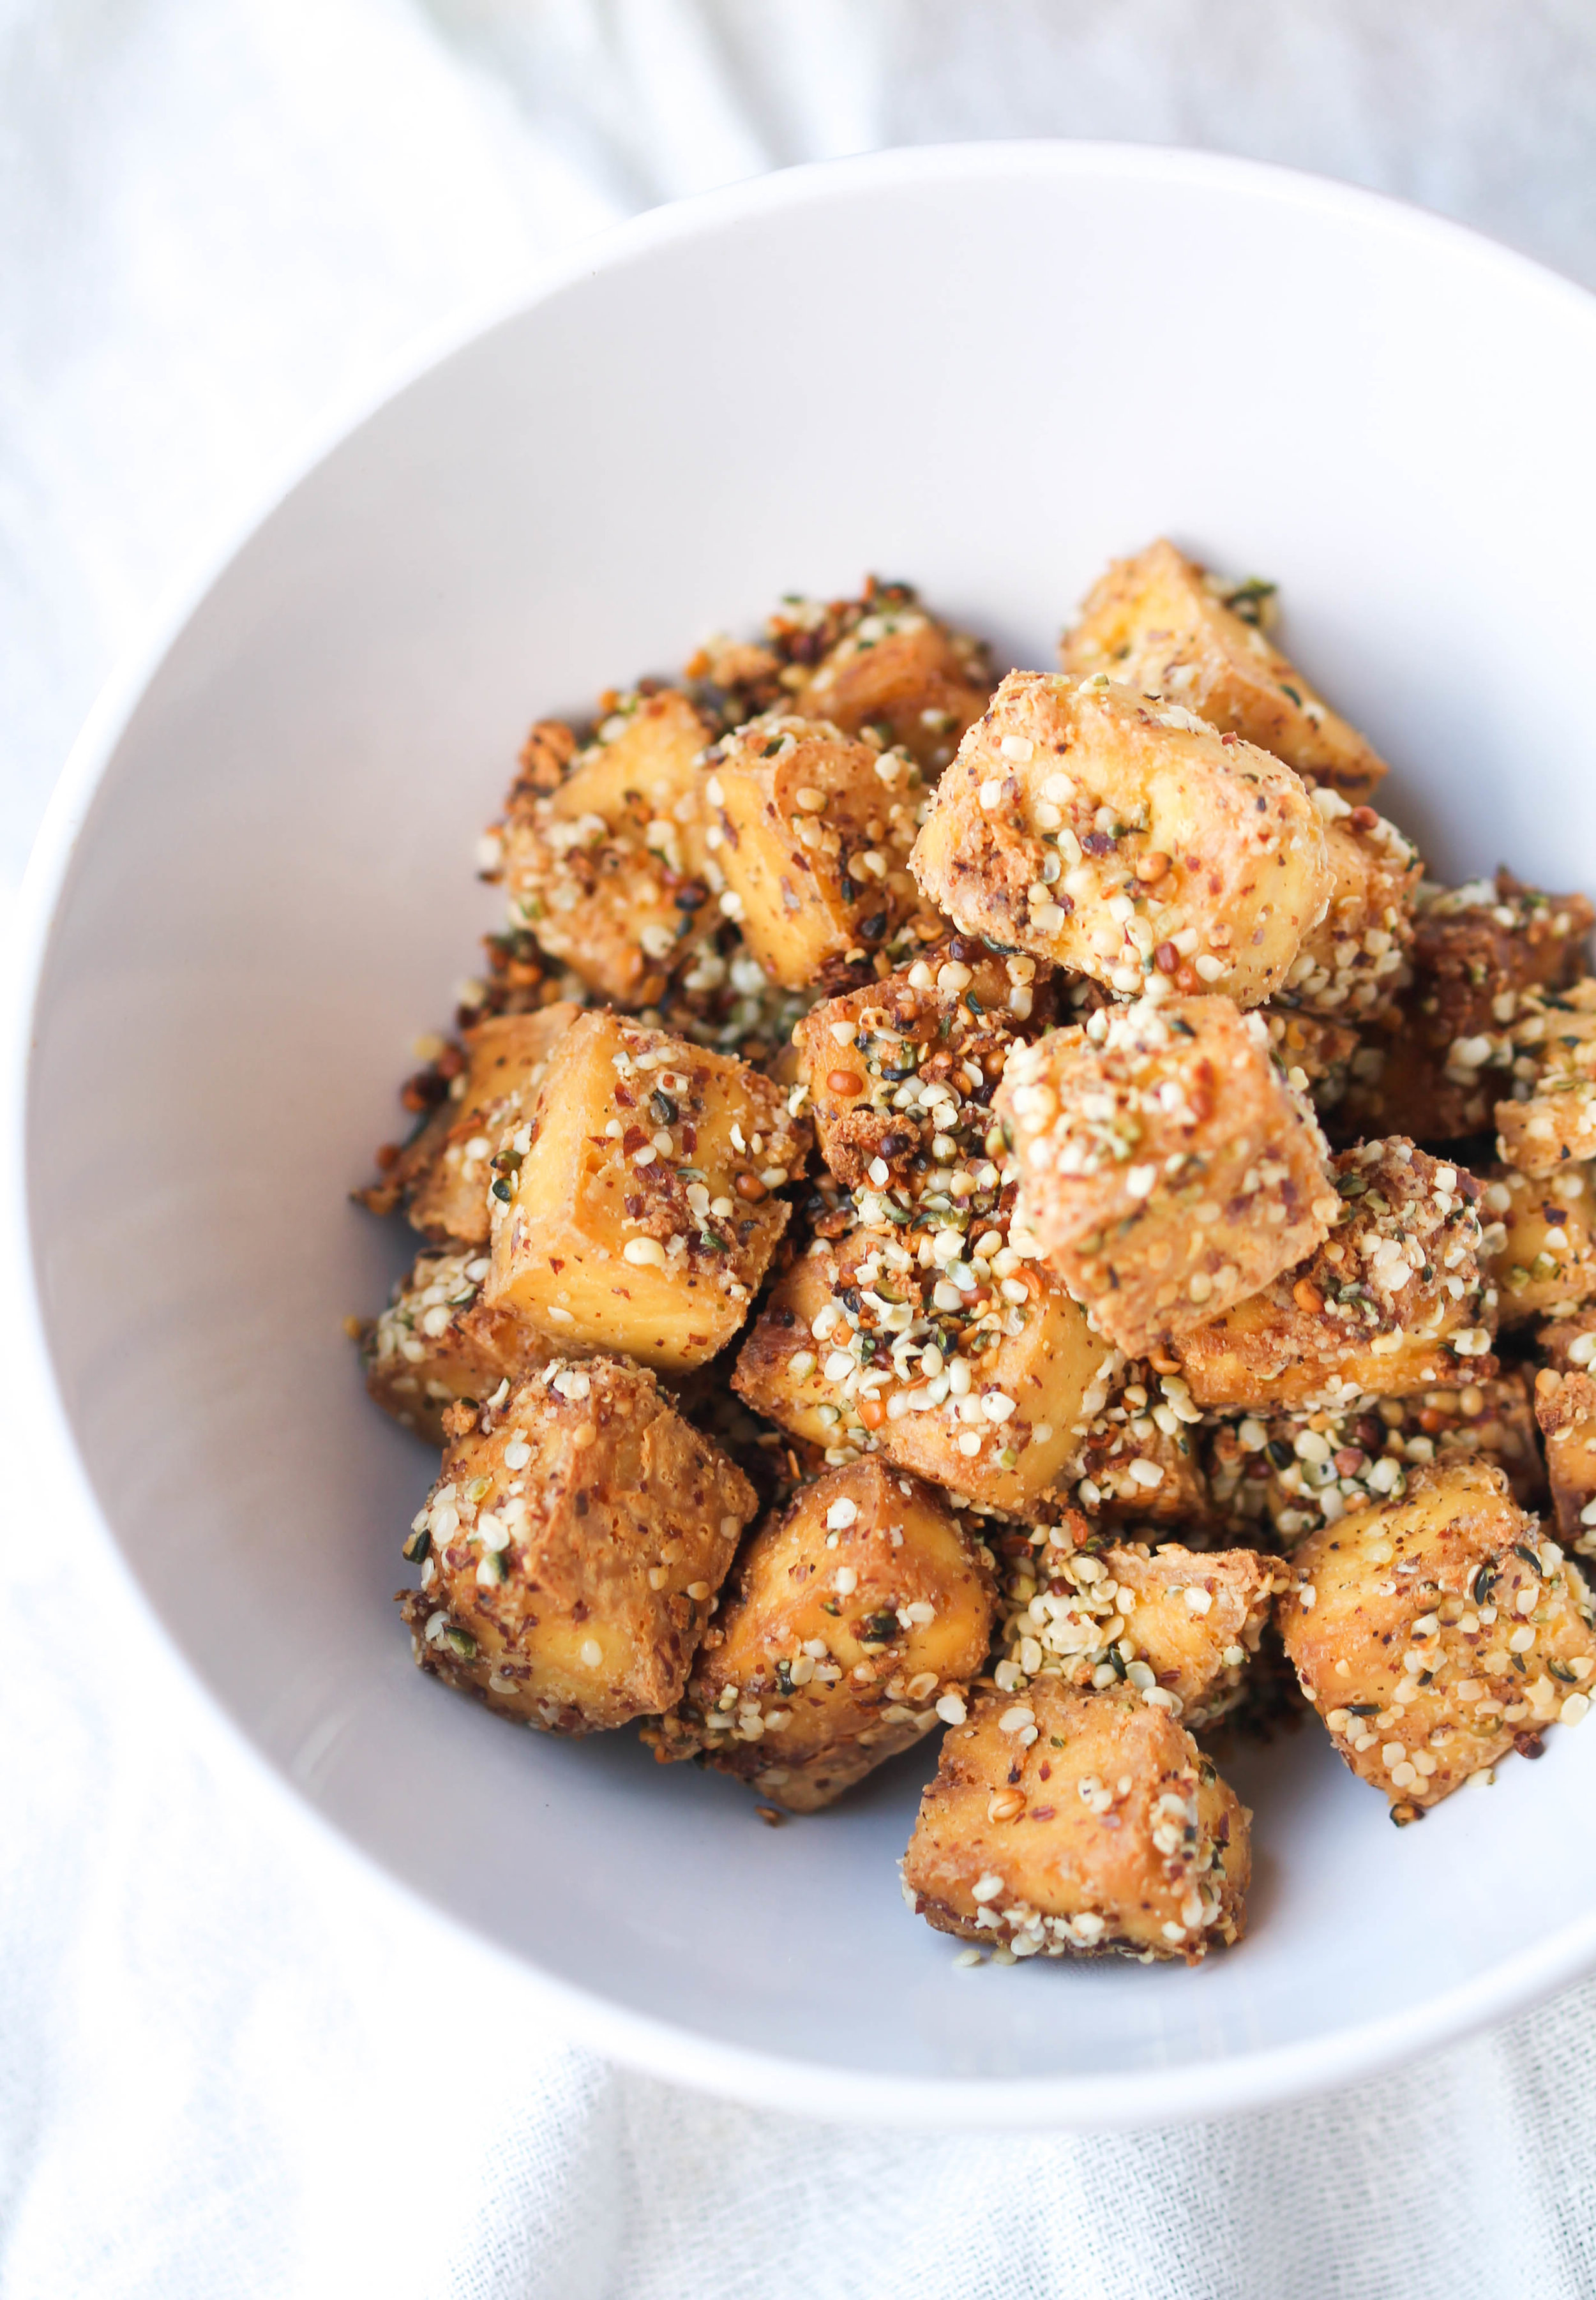 Easy, Versatile Hemp Crusted Tofu can be made under an hour! Packed with protein, omega-3 fatty acids, calcium, and other nutrients, Hemp Crusted Tofu can be enjoyed with salad, rice, or noodles, both hot or cold.